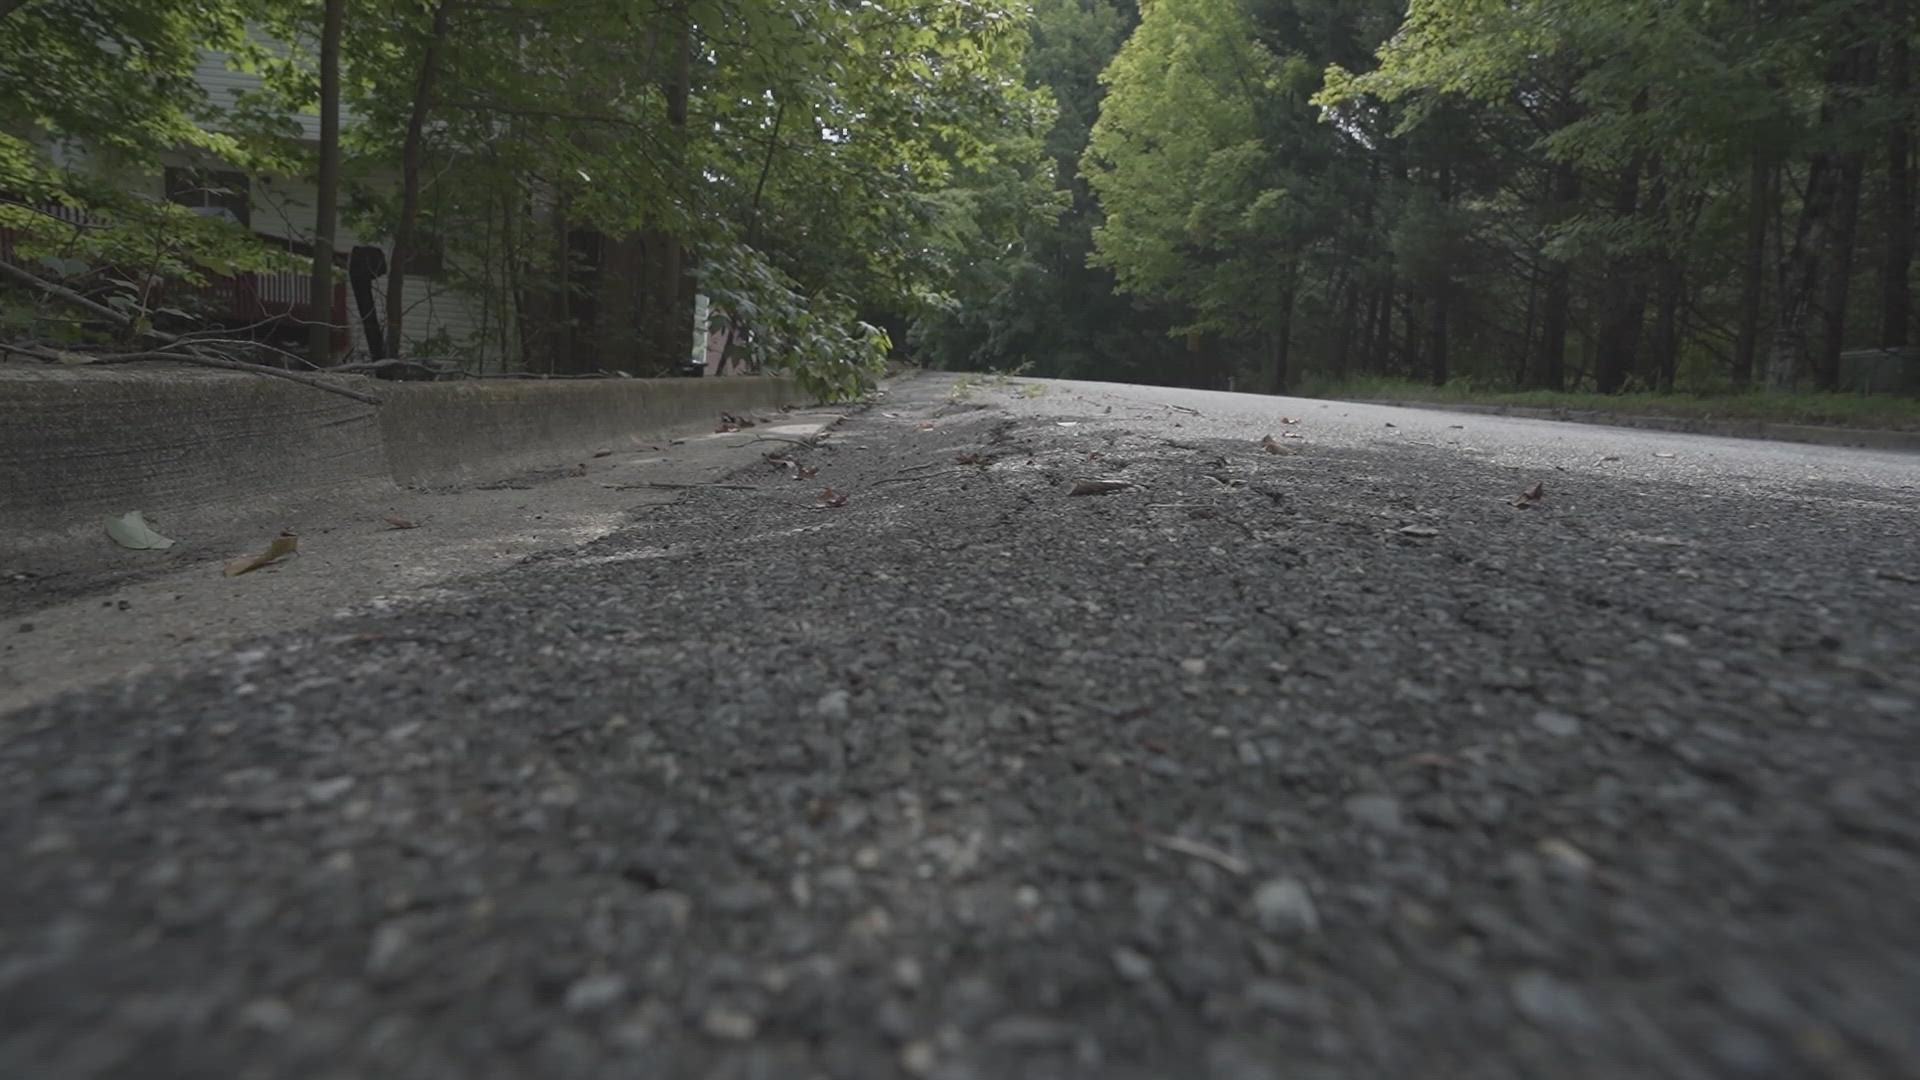 Homeowners say the Marlton IV HOA hasn't been active in more than a decade.  Now, they're staring down a costly road repair.